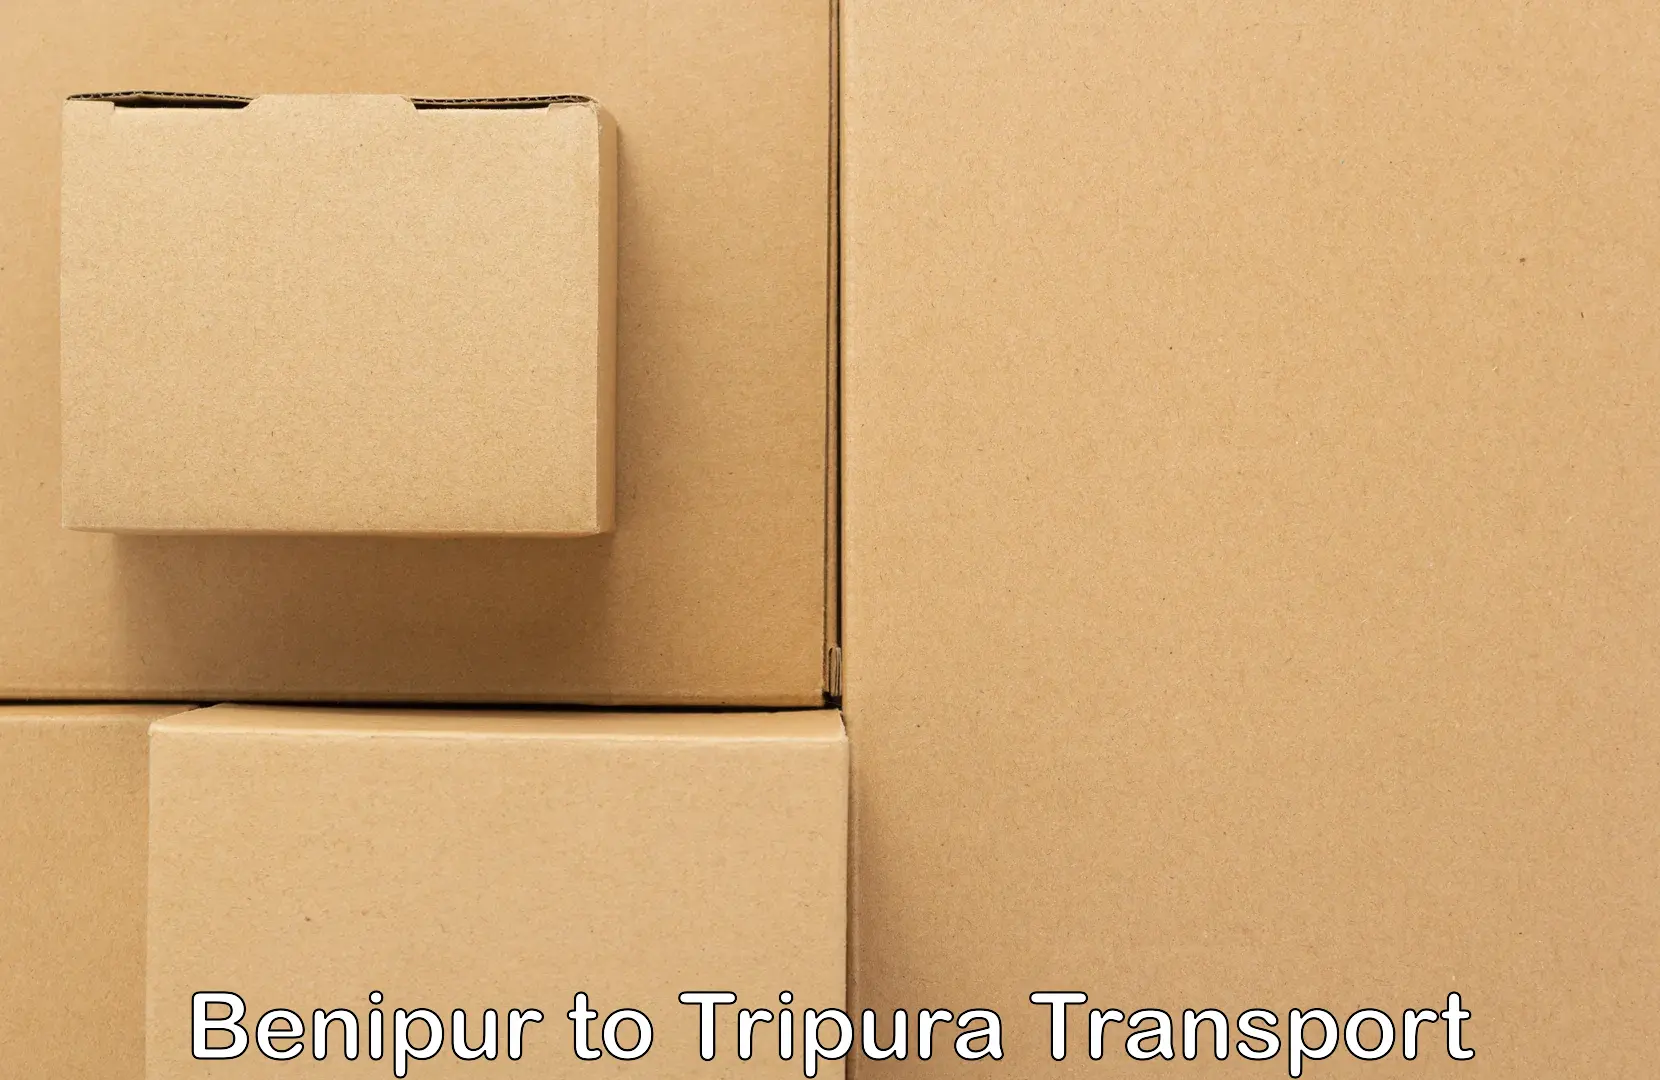 Goods delivery service Benipur to Udaipur Tripura